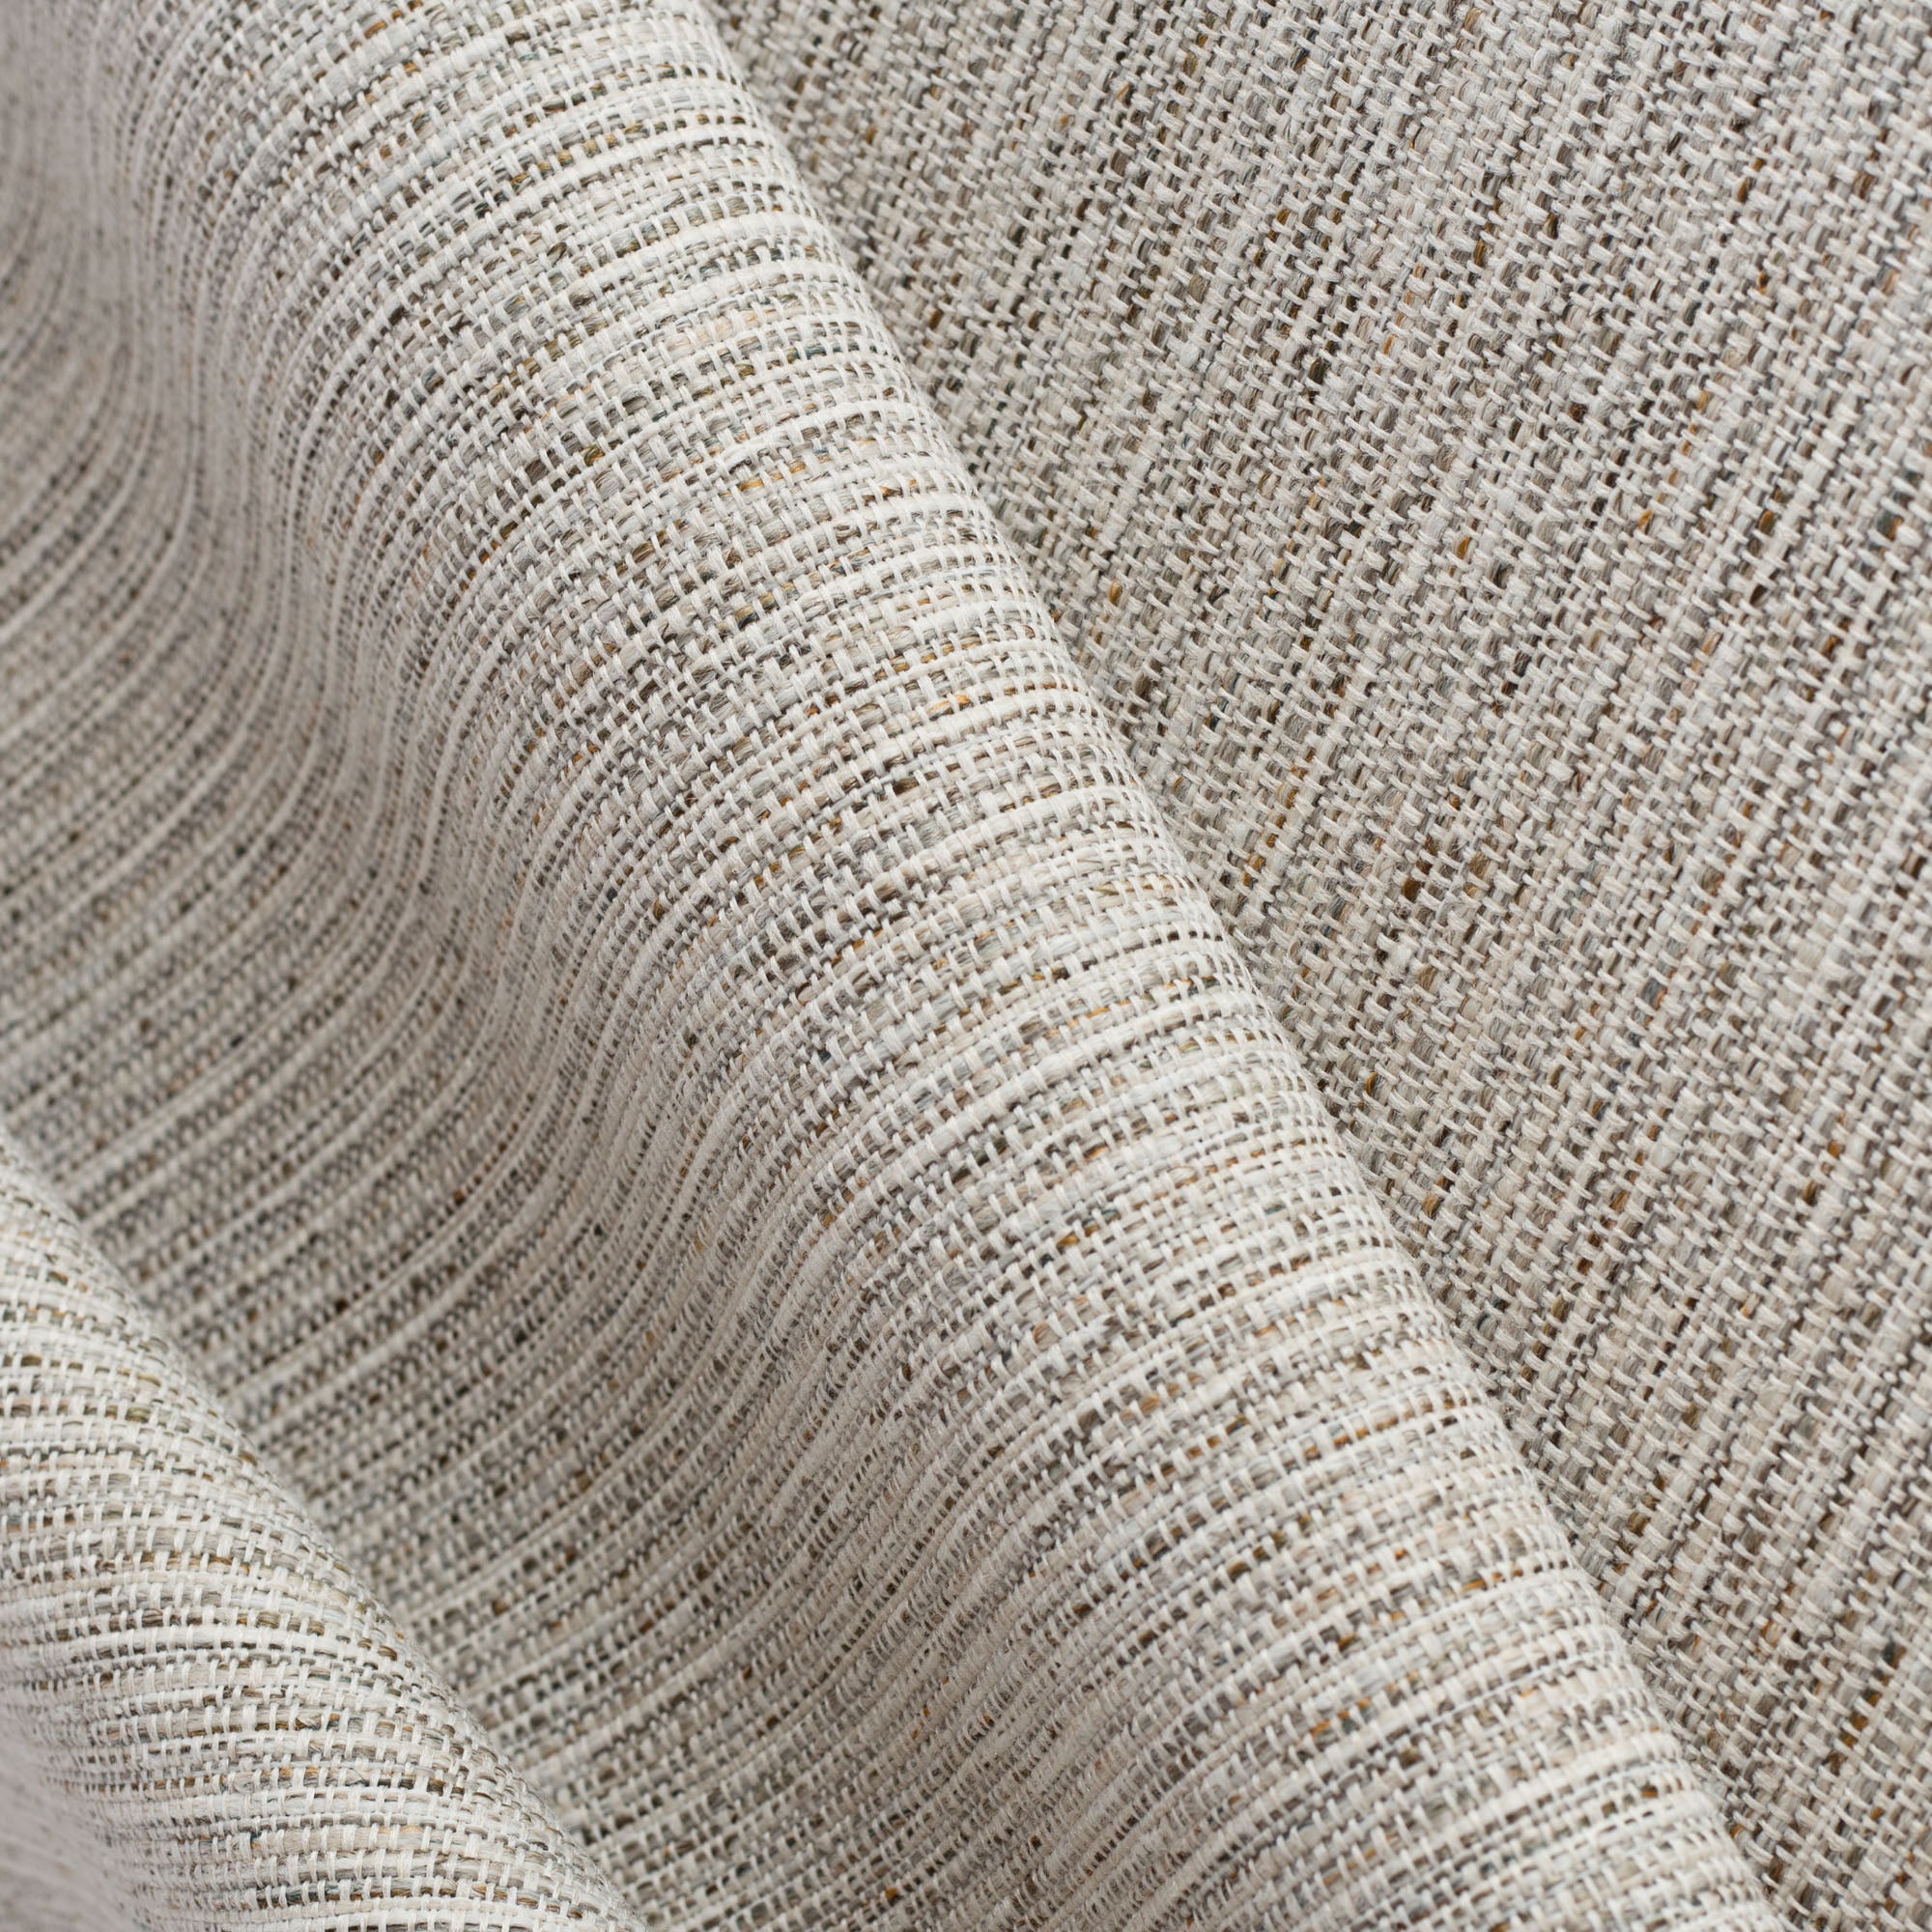 Arthur Tweed, a textured warm grey performance fabric from Tonic Living